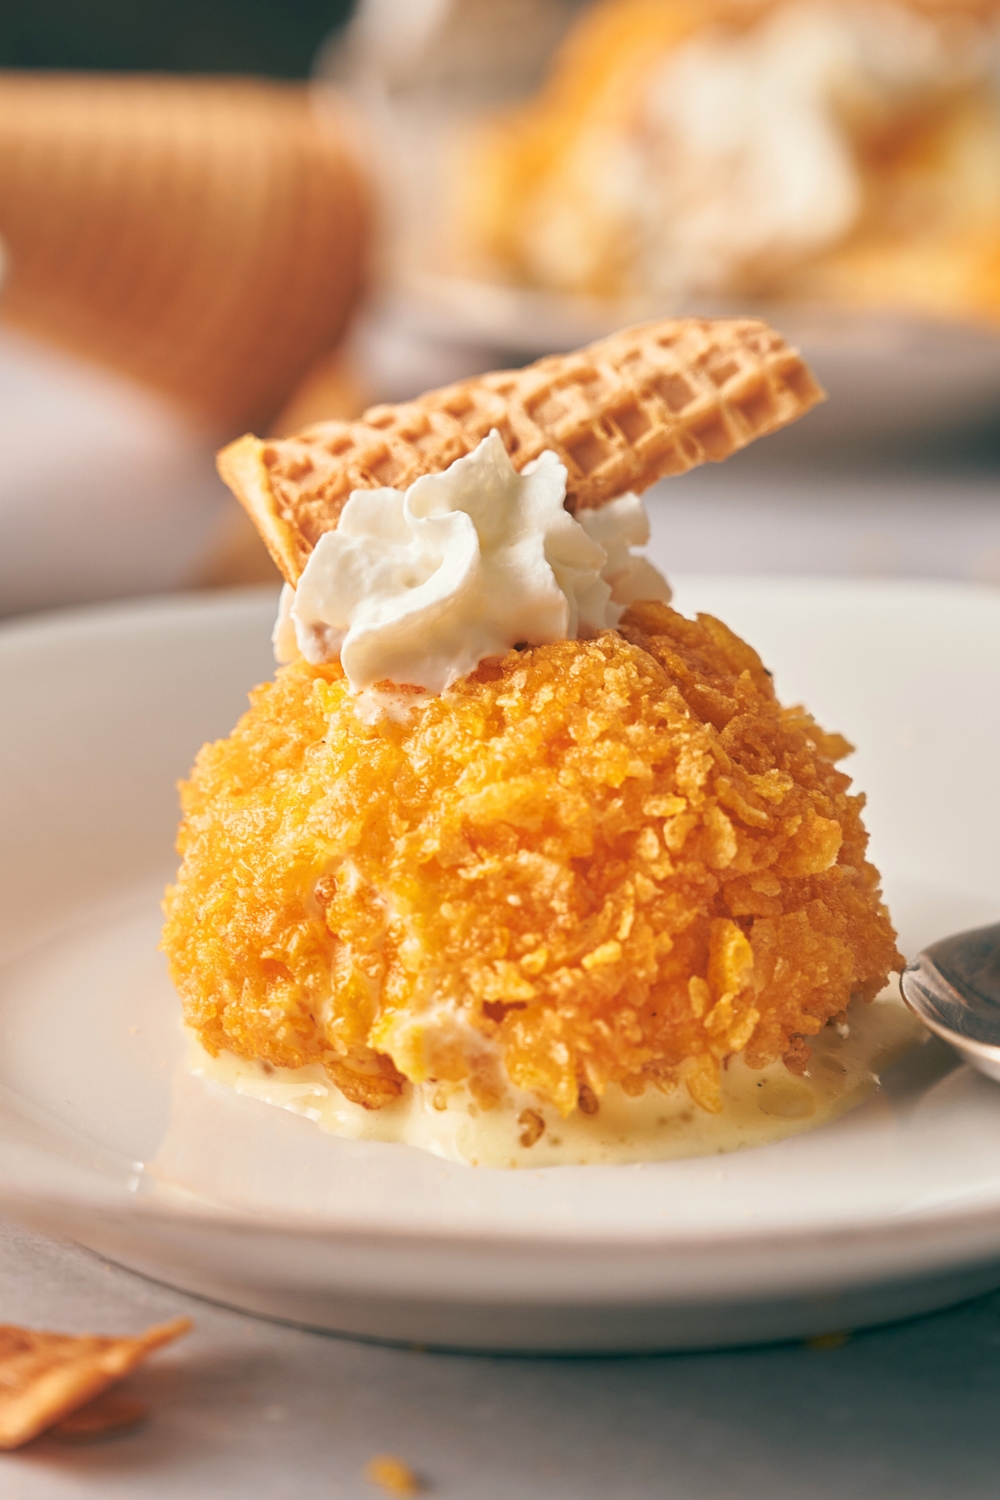 A fried ice cream ball with whipped cream and a waffle cone on top.